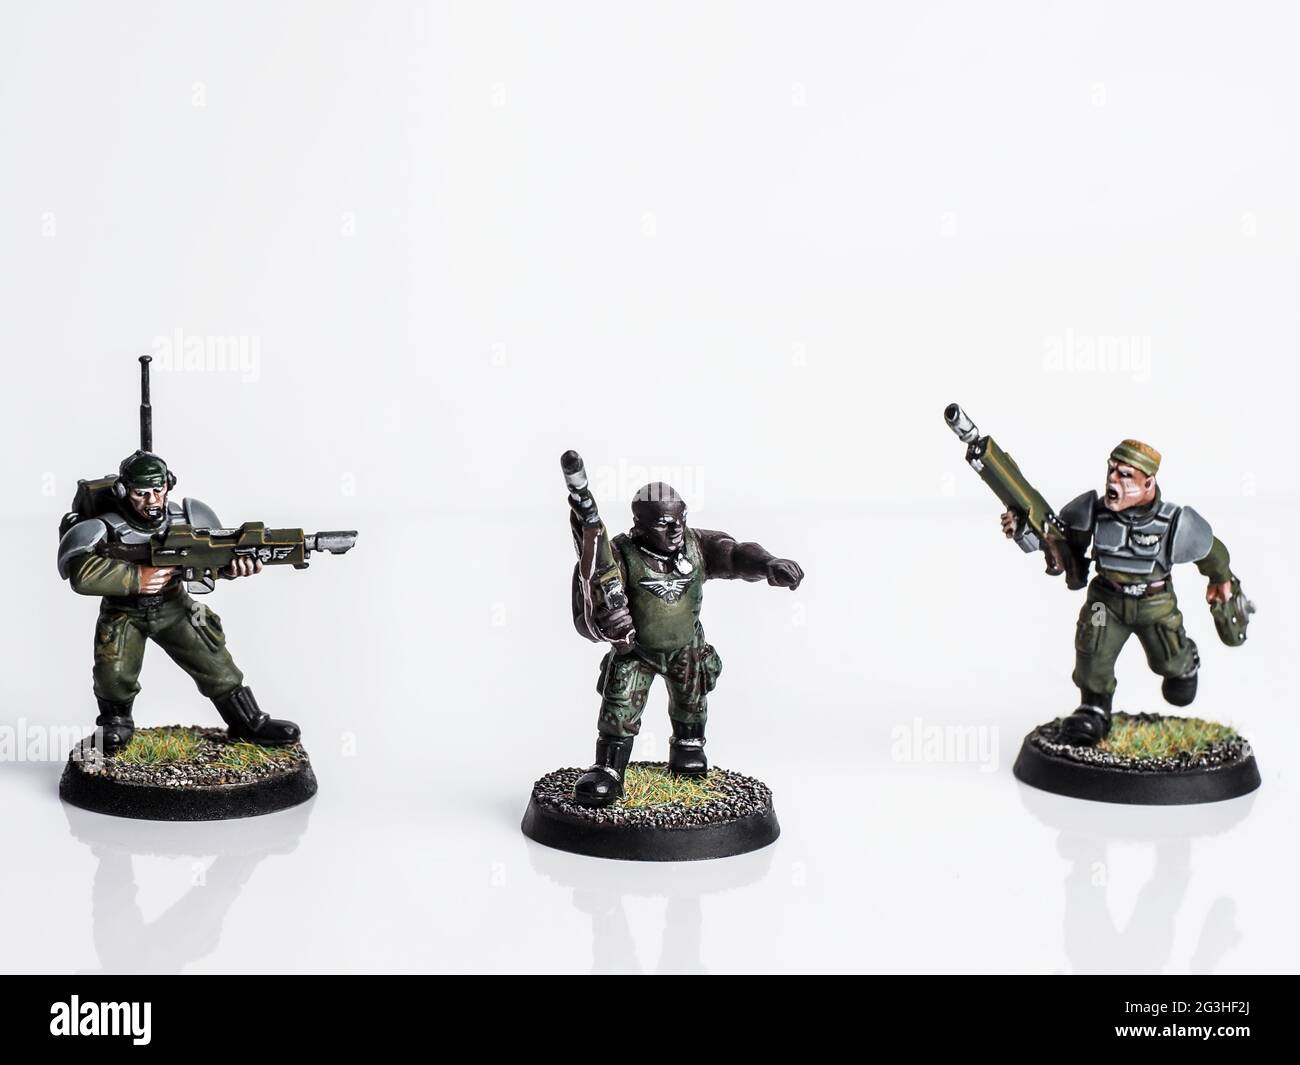 Warhammer 40k Imperial guards figures, figurines, wargame Stock Photo